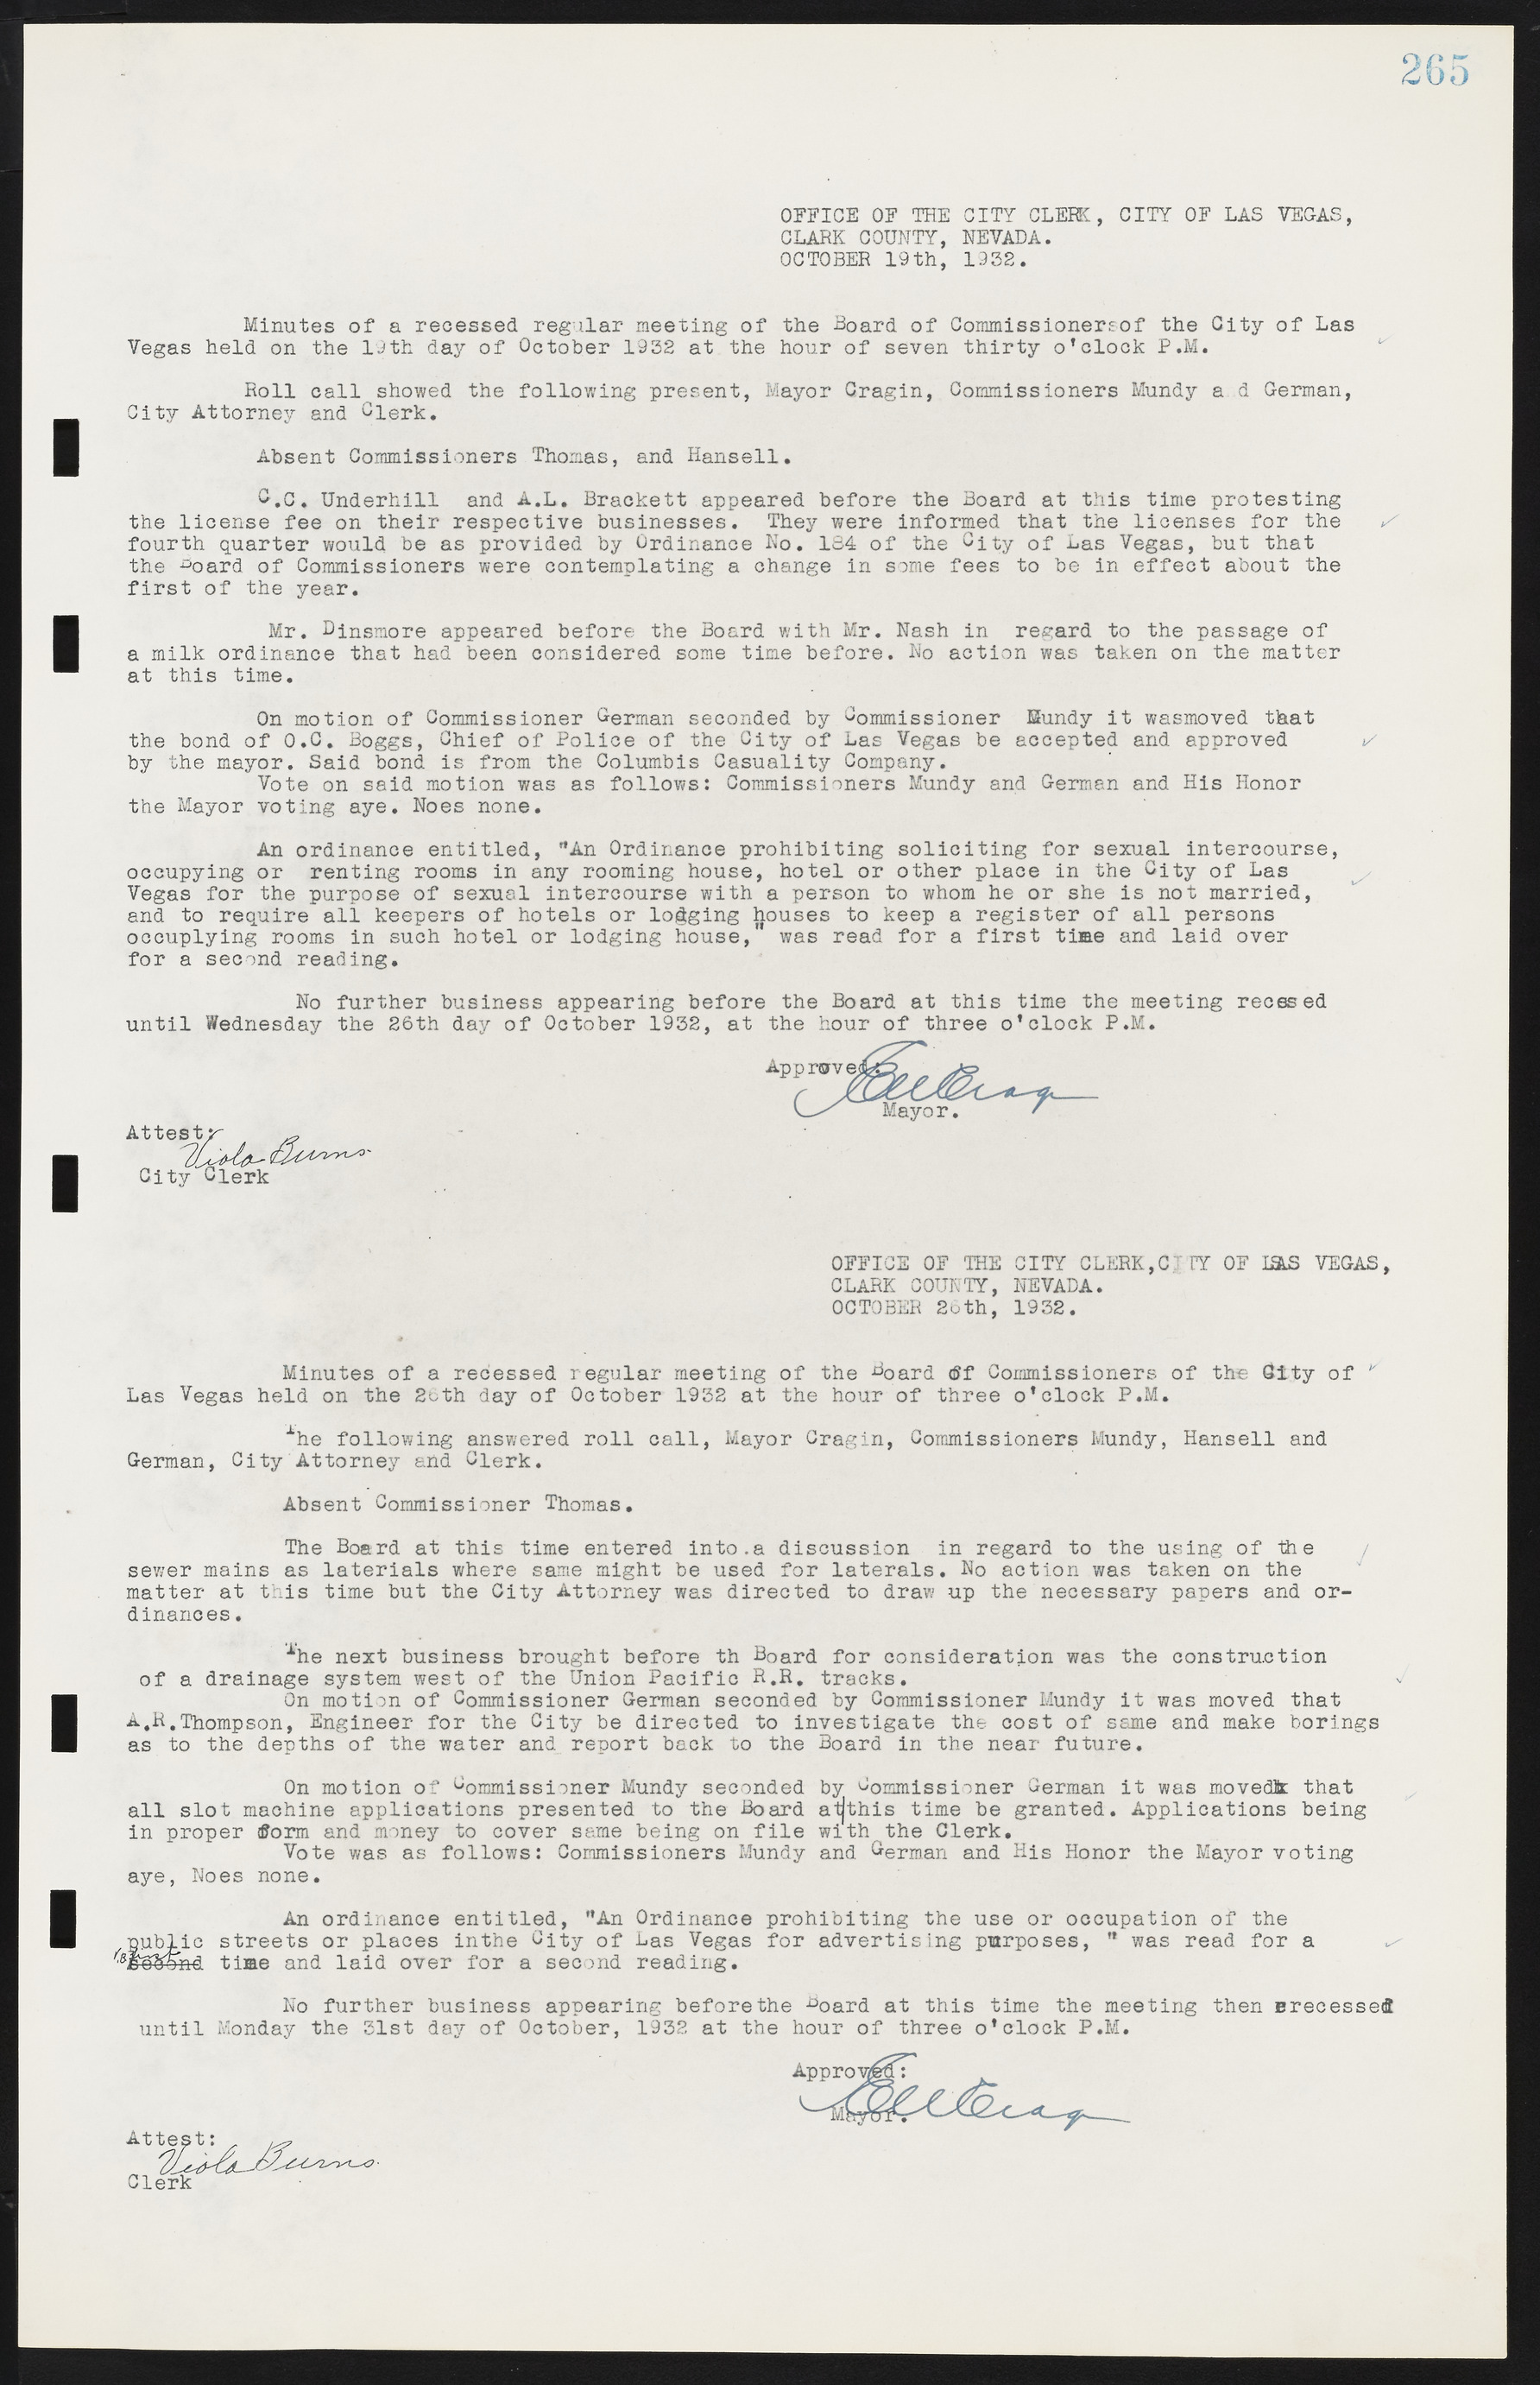 Las Vegas City Commission Minutes, May 14, 1929 to February 11, 1937, lvc000003-271